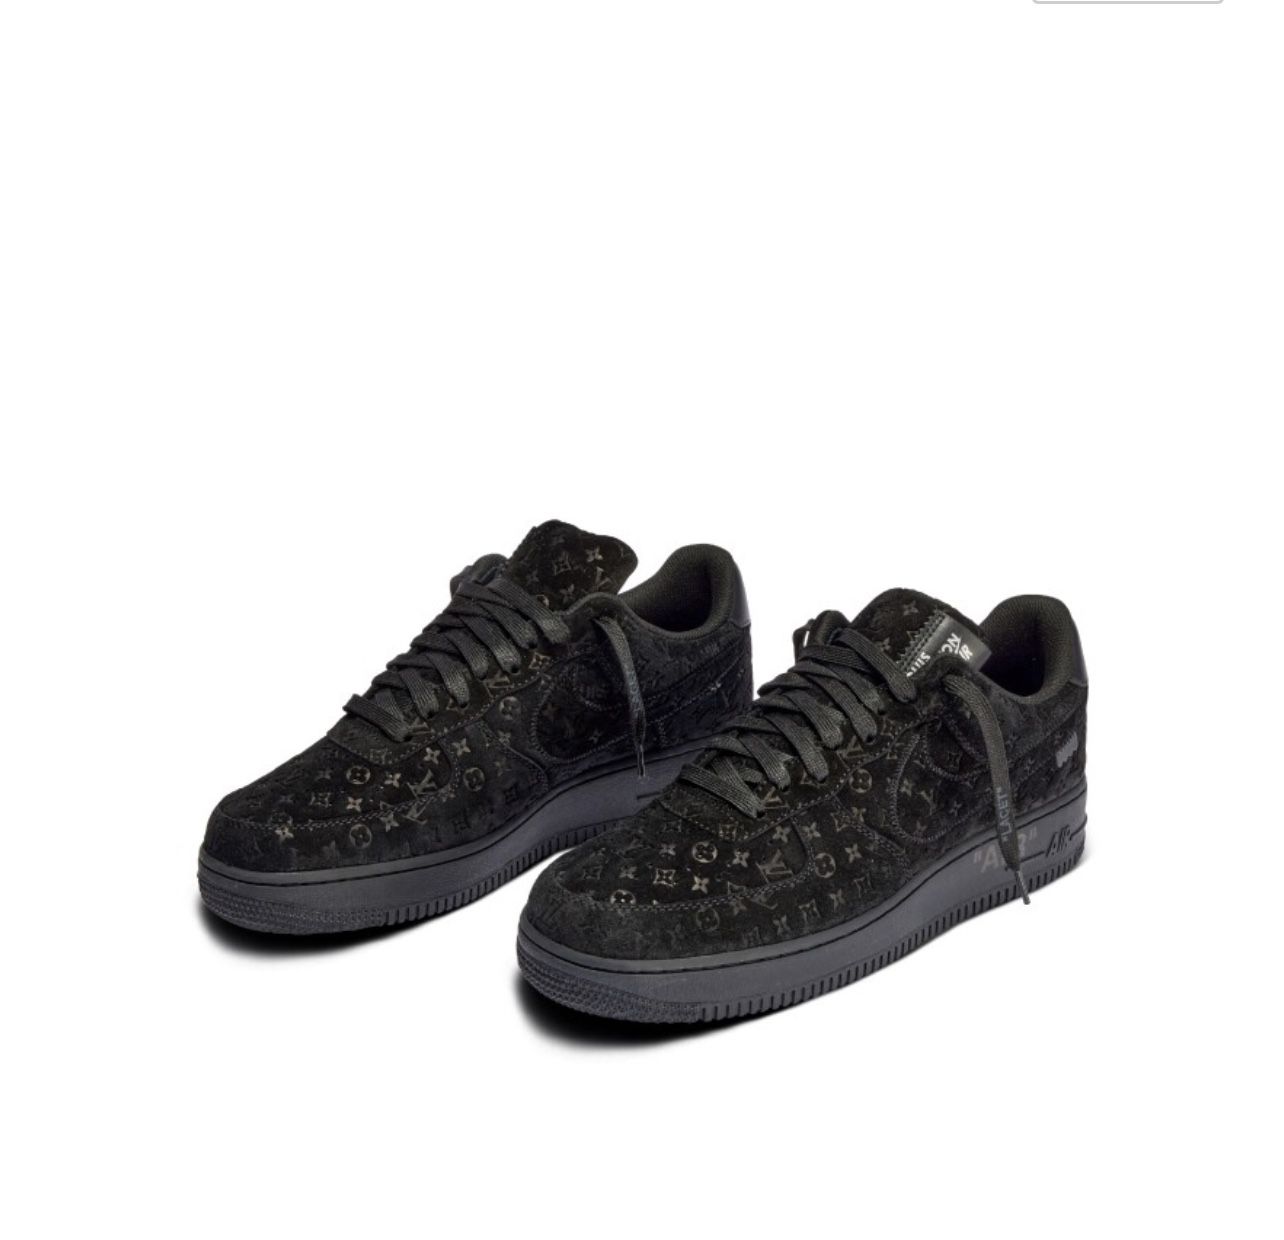 $5500. Brand New Louis Vuitton x Nike AF1 Black Suede. Size 8.5